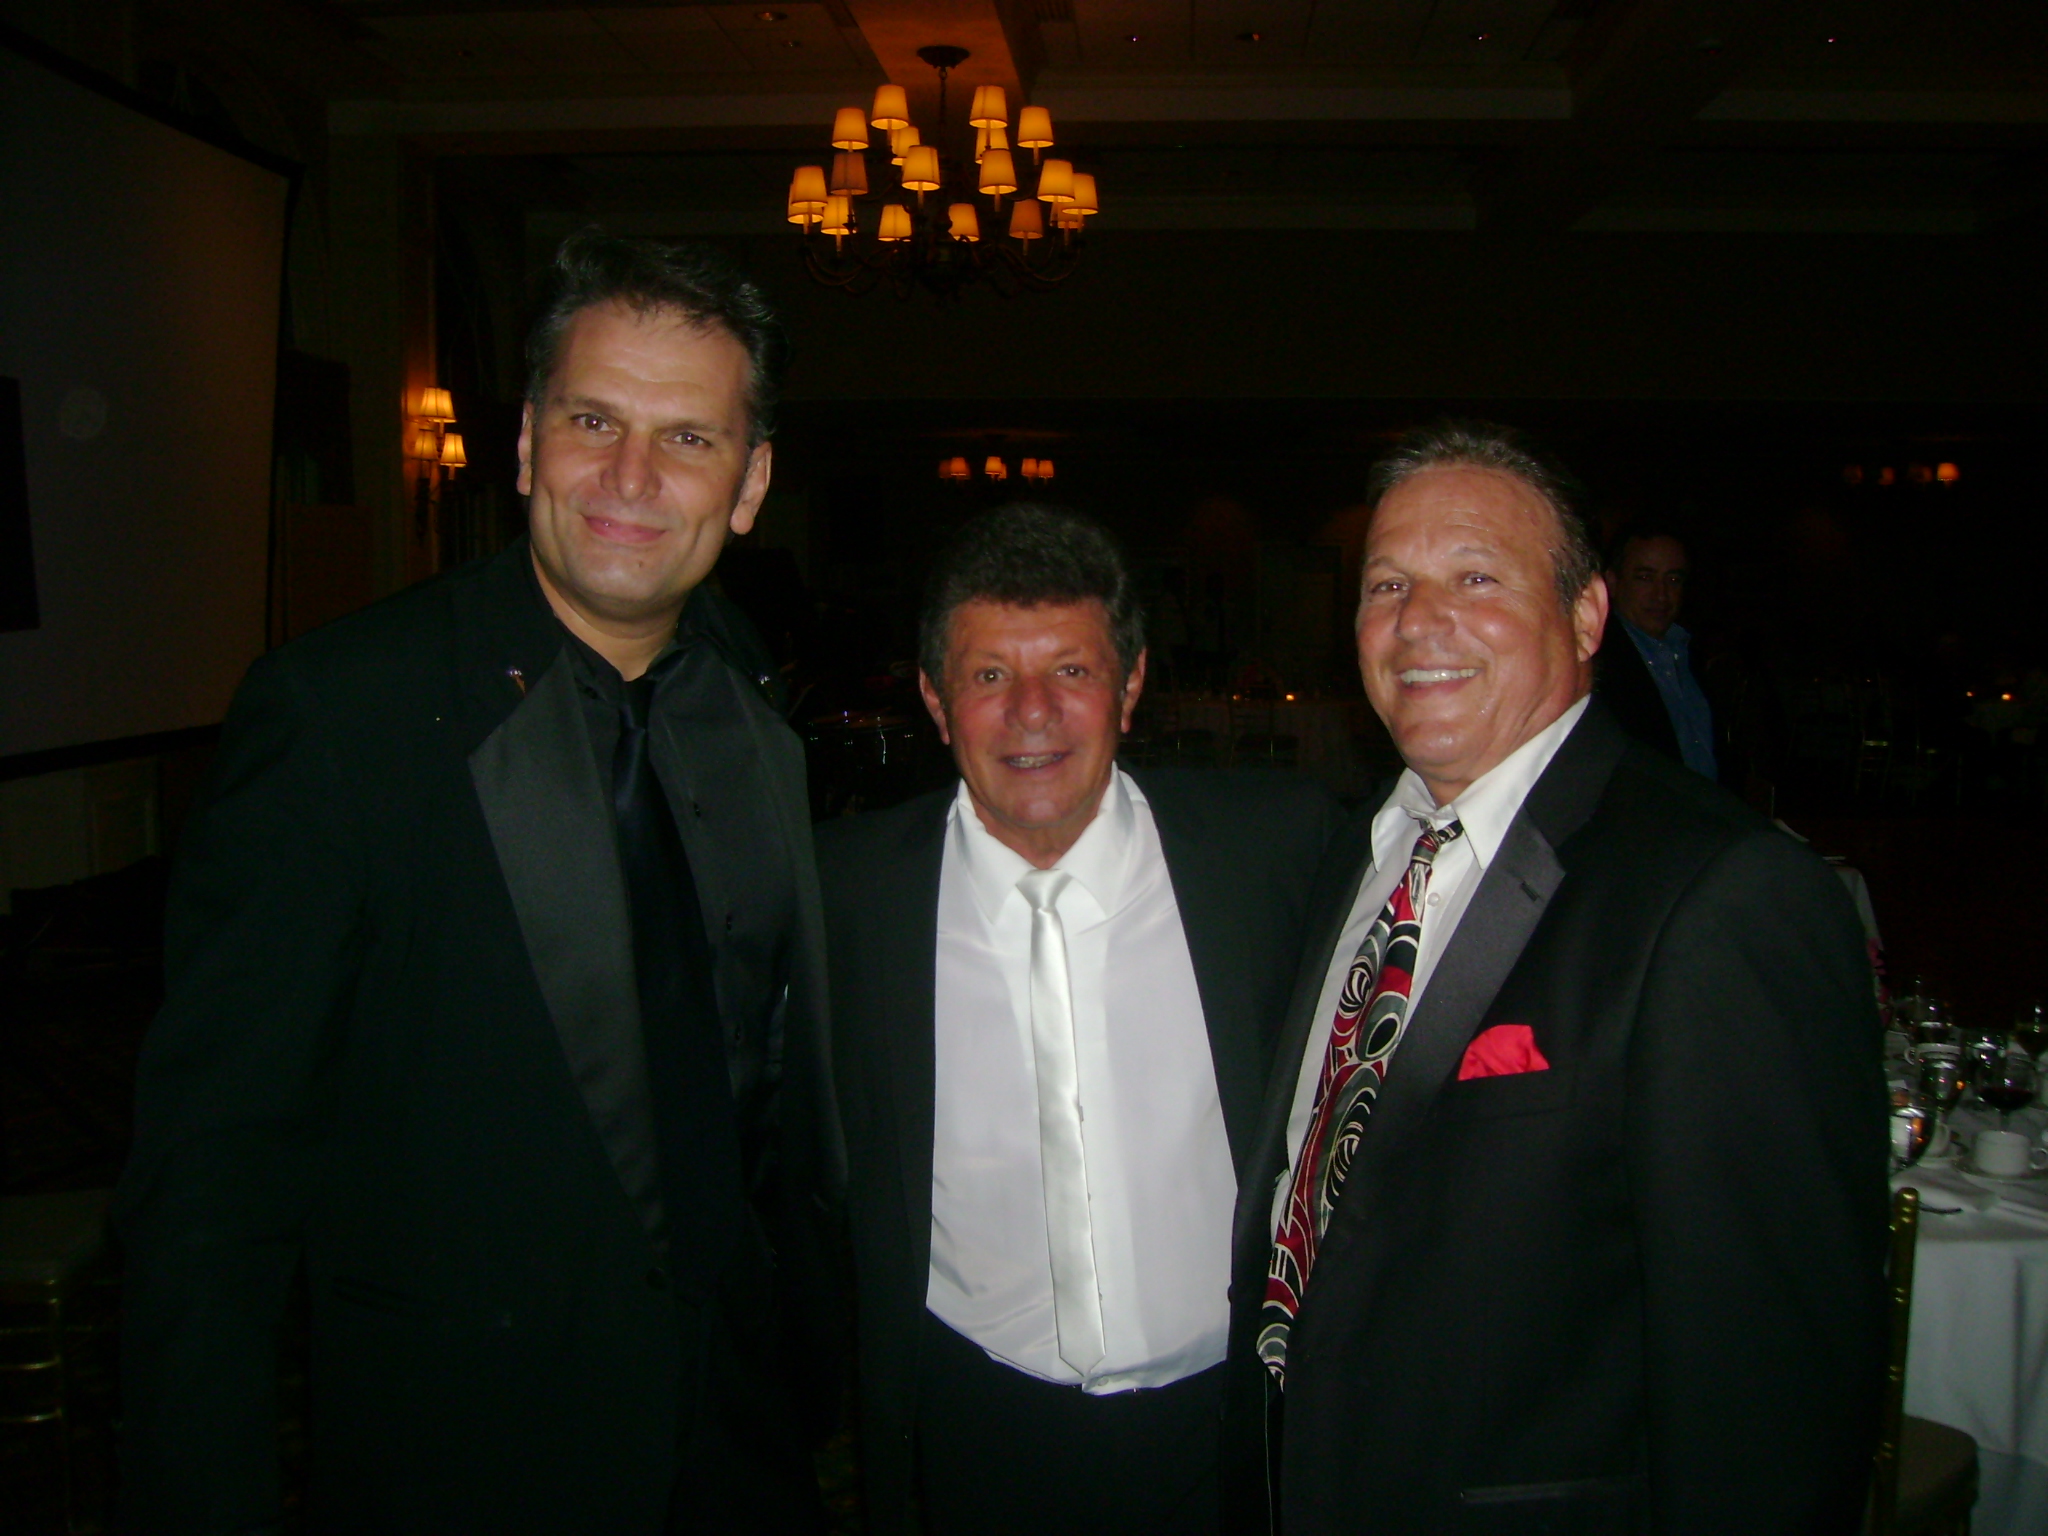 Performing with the one and only Mr. Frankie Avalon,- Caldwell NJ Show with guest Darly Dawkins; - plus Broadway's Pat Jude (pic right) as well.